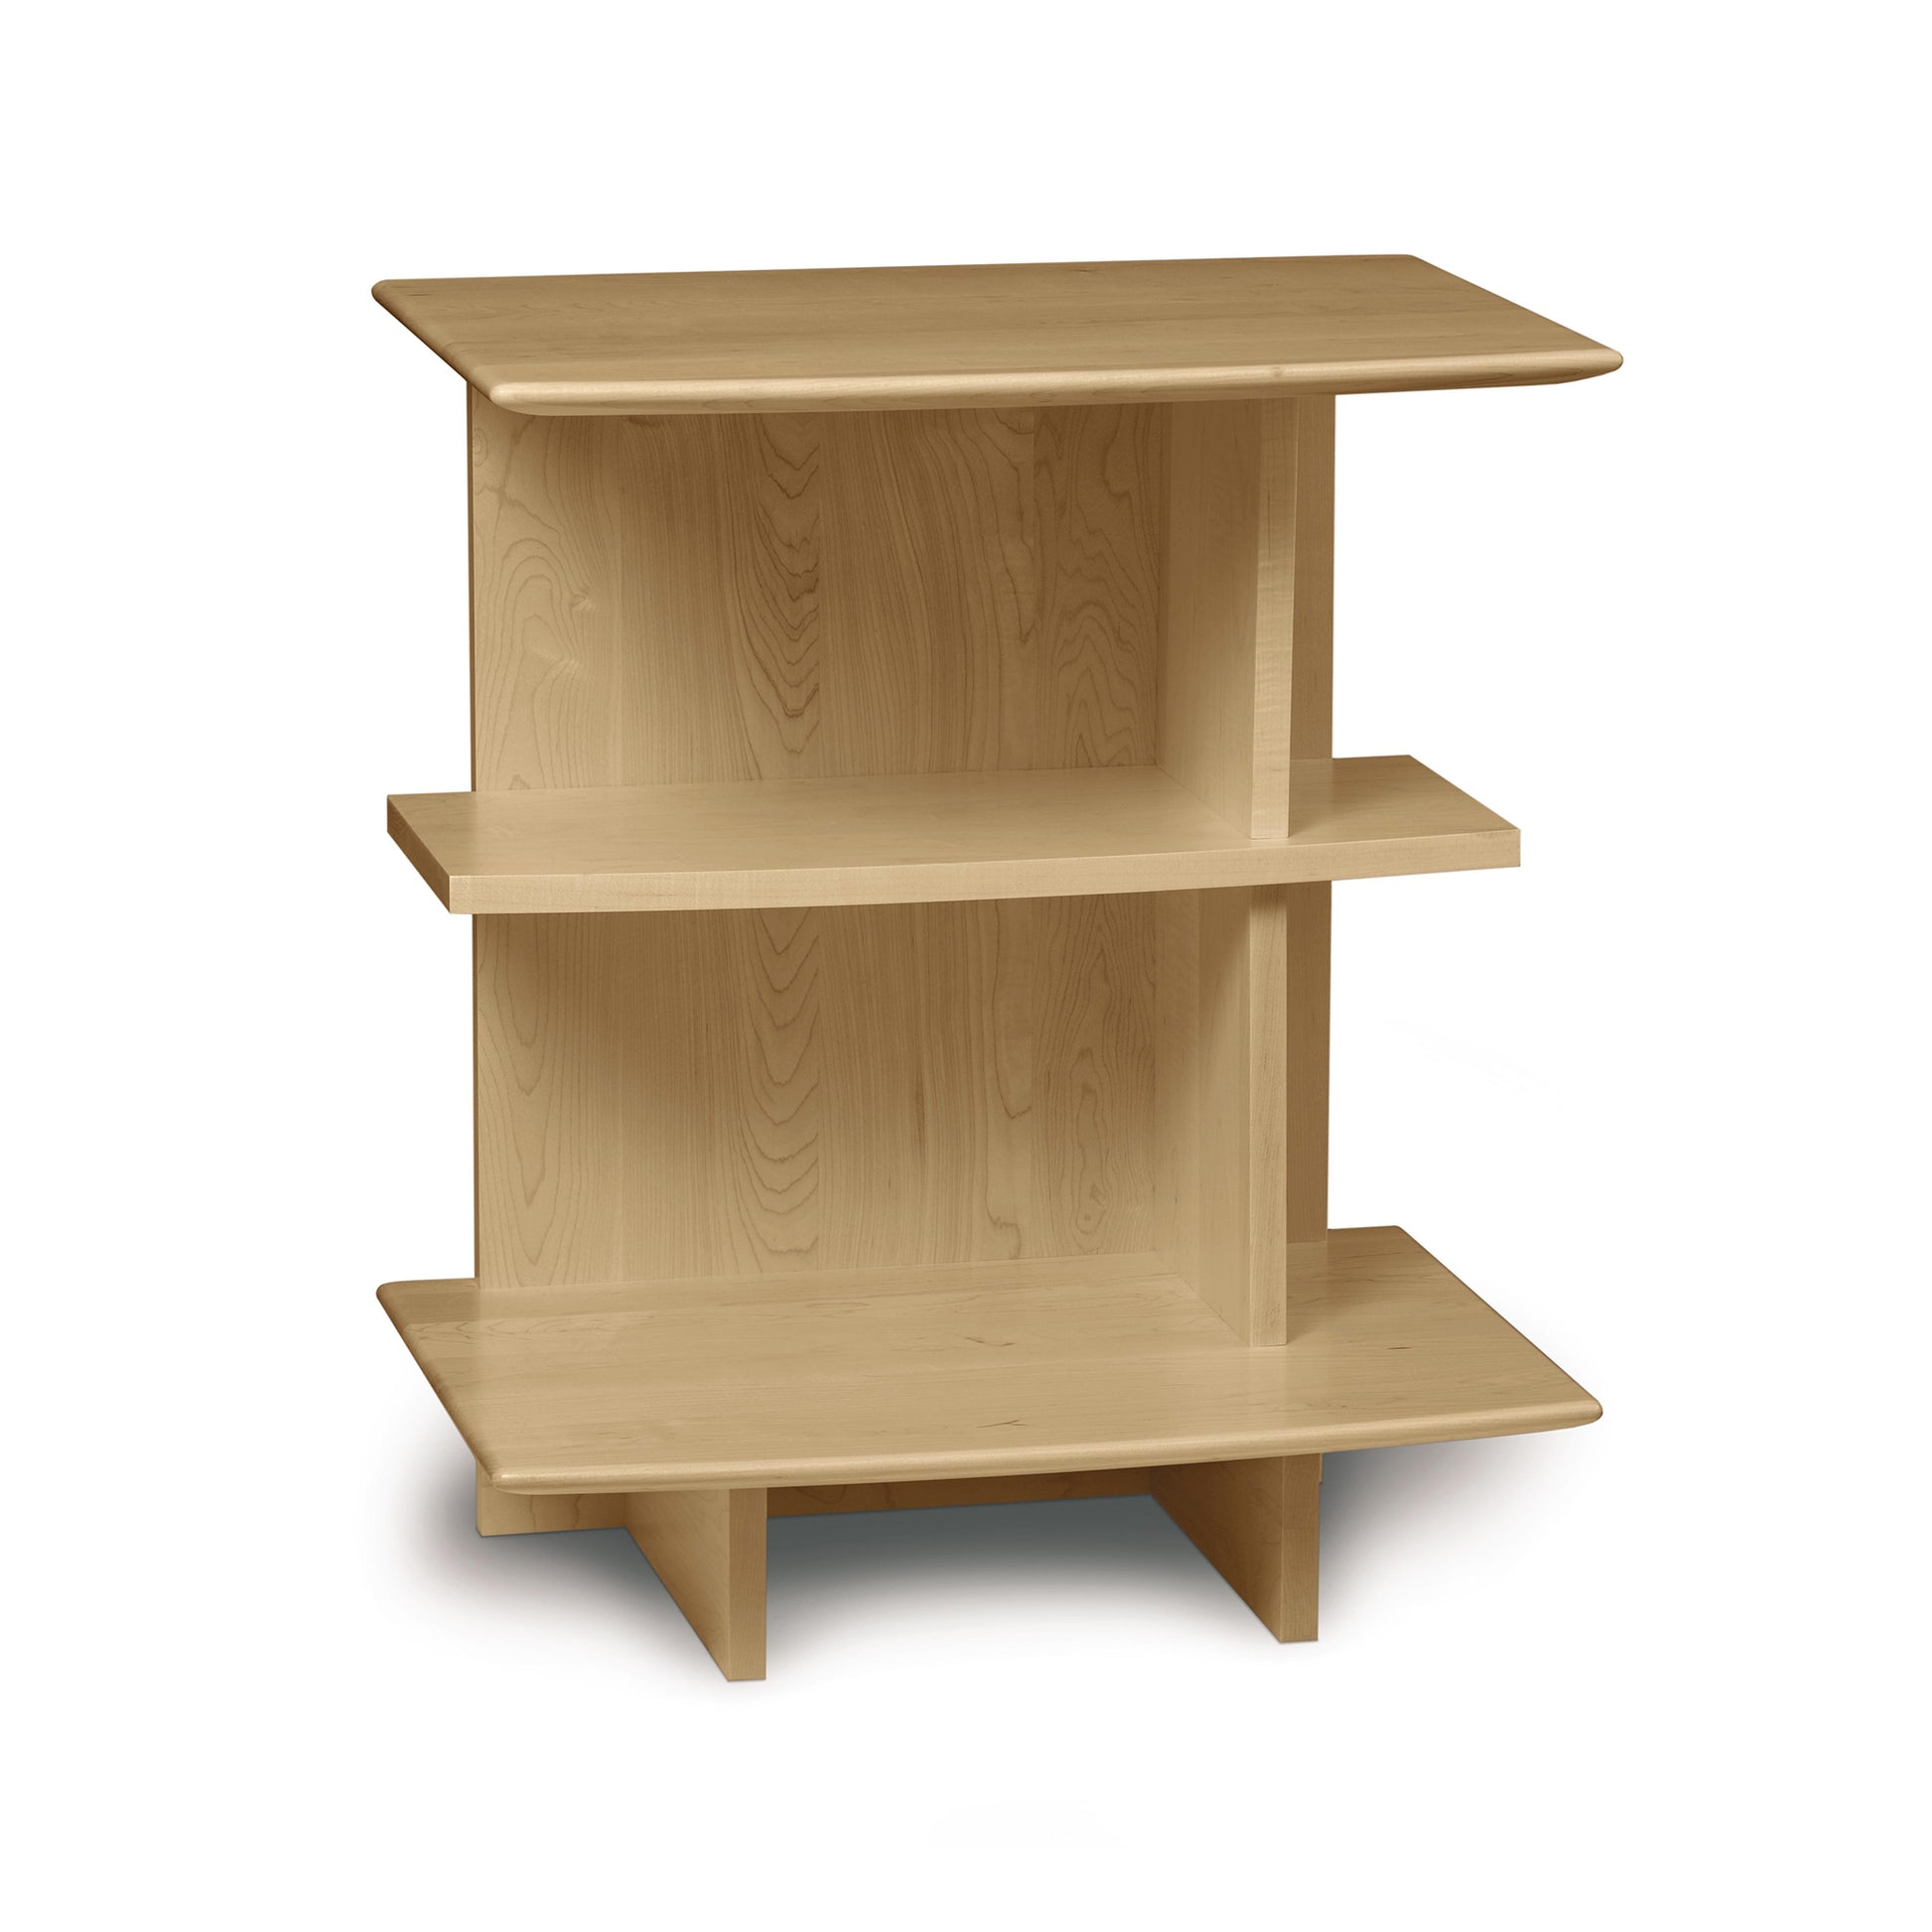 The Sarah Open Shelf Maple Nightstand - Right -Clearance from Copeland Furniture features a small wooden shelf perfect for under-bed storage. With its Copeland's solid wood craftsmanship, this shelf will add a touch of elegance to any room.